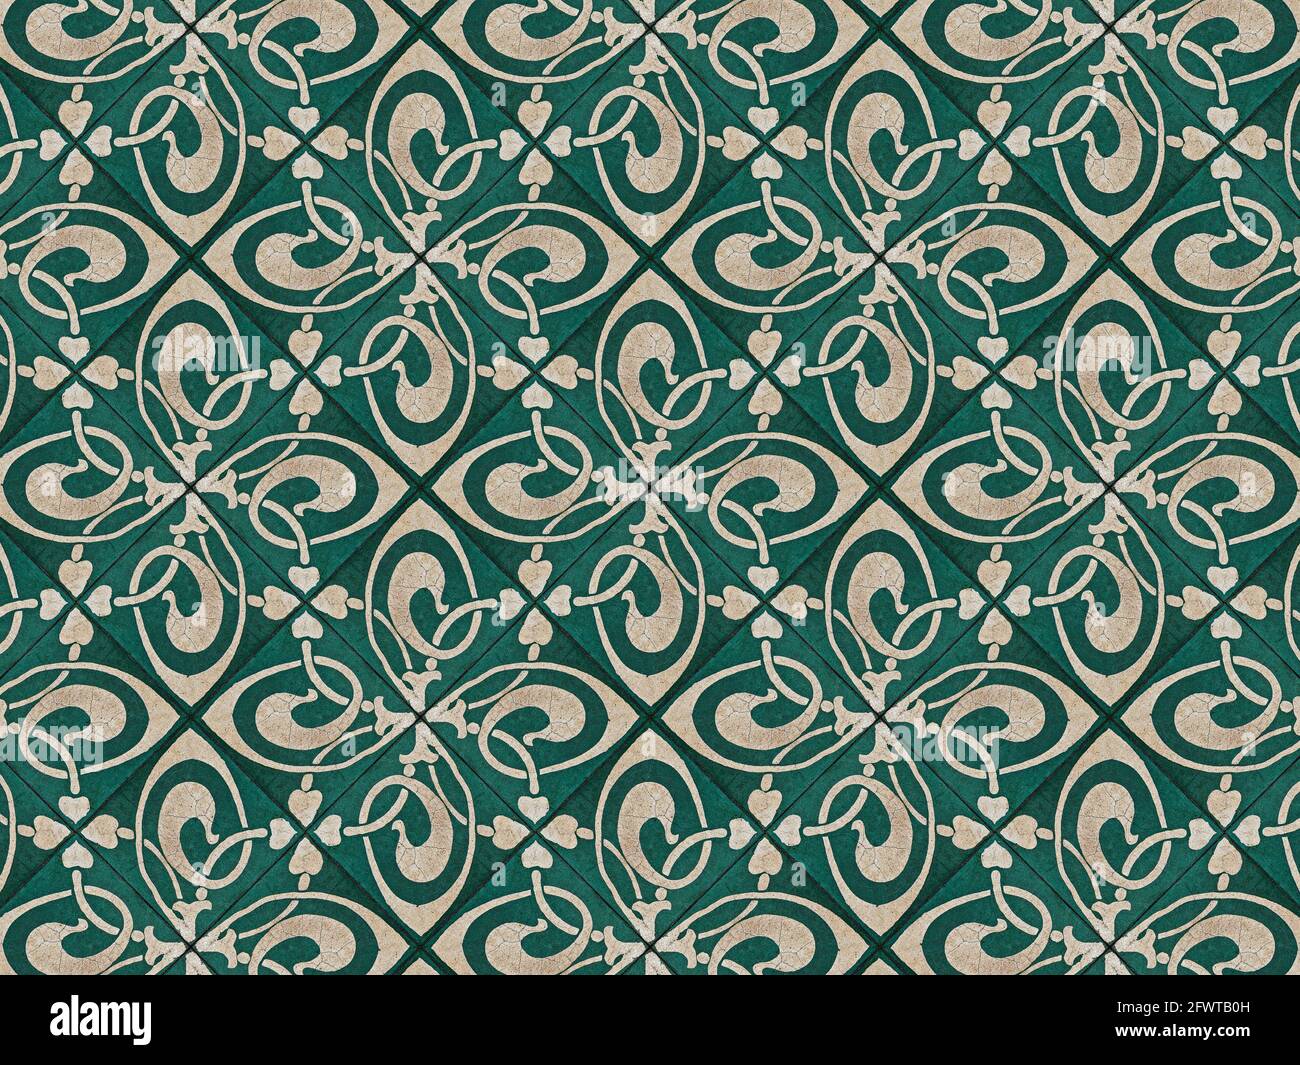 Ancient hydraulic tiles seamless pattern background Stock Photo